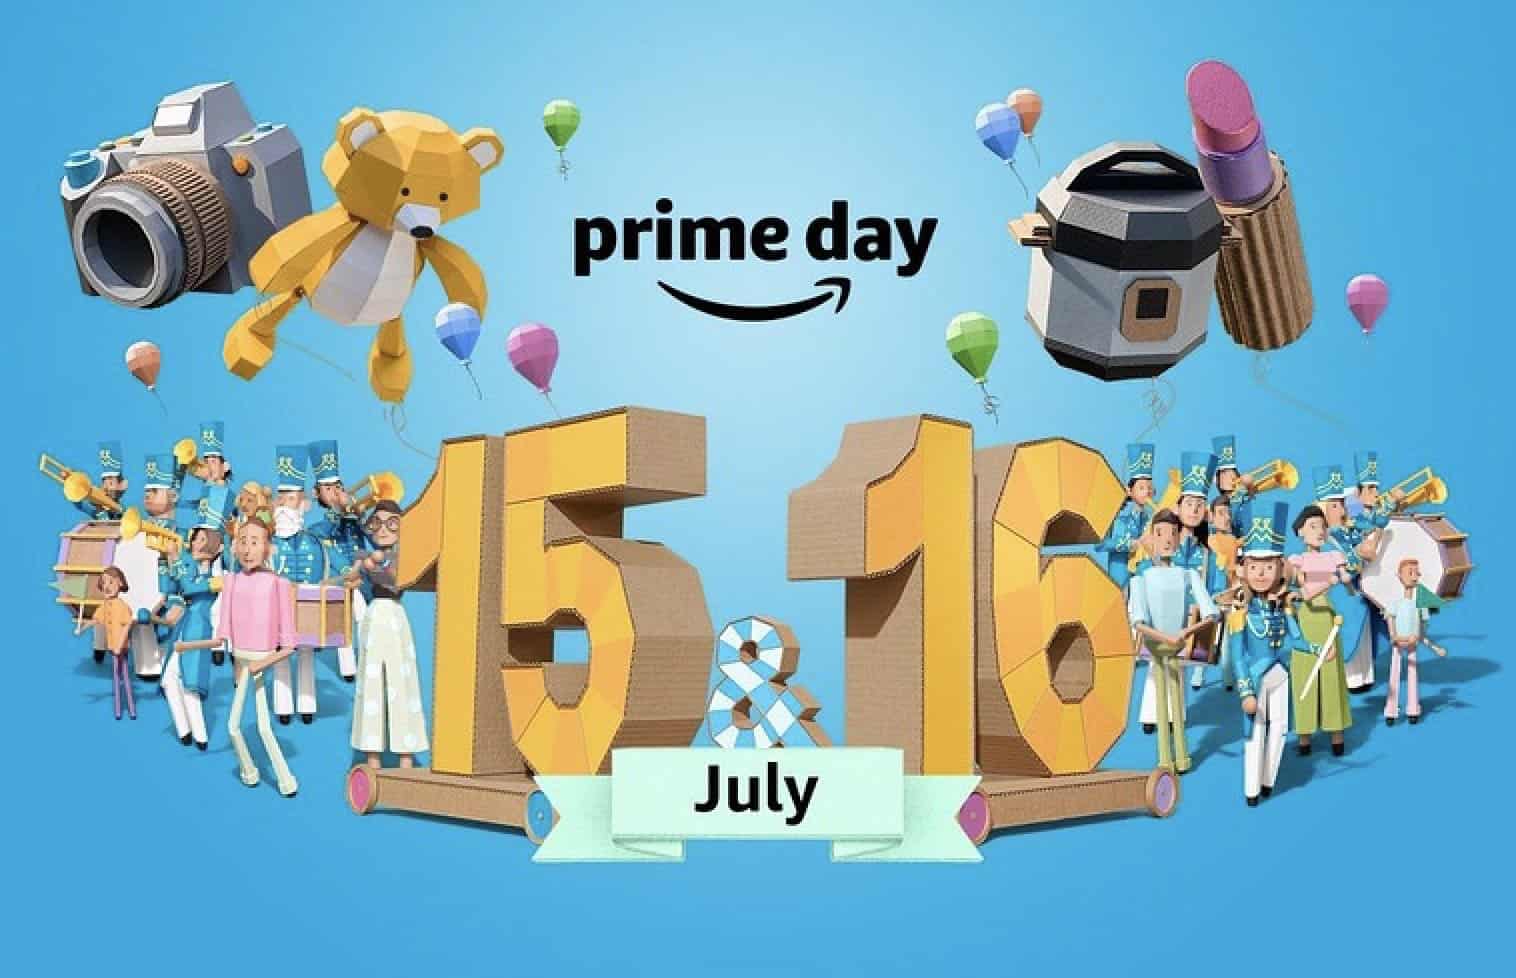 Amazon Prime Day Deals on Rowing Machines 2019